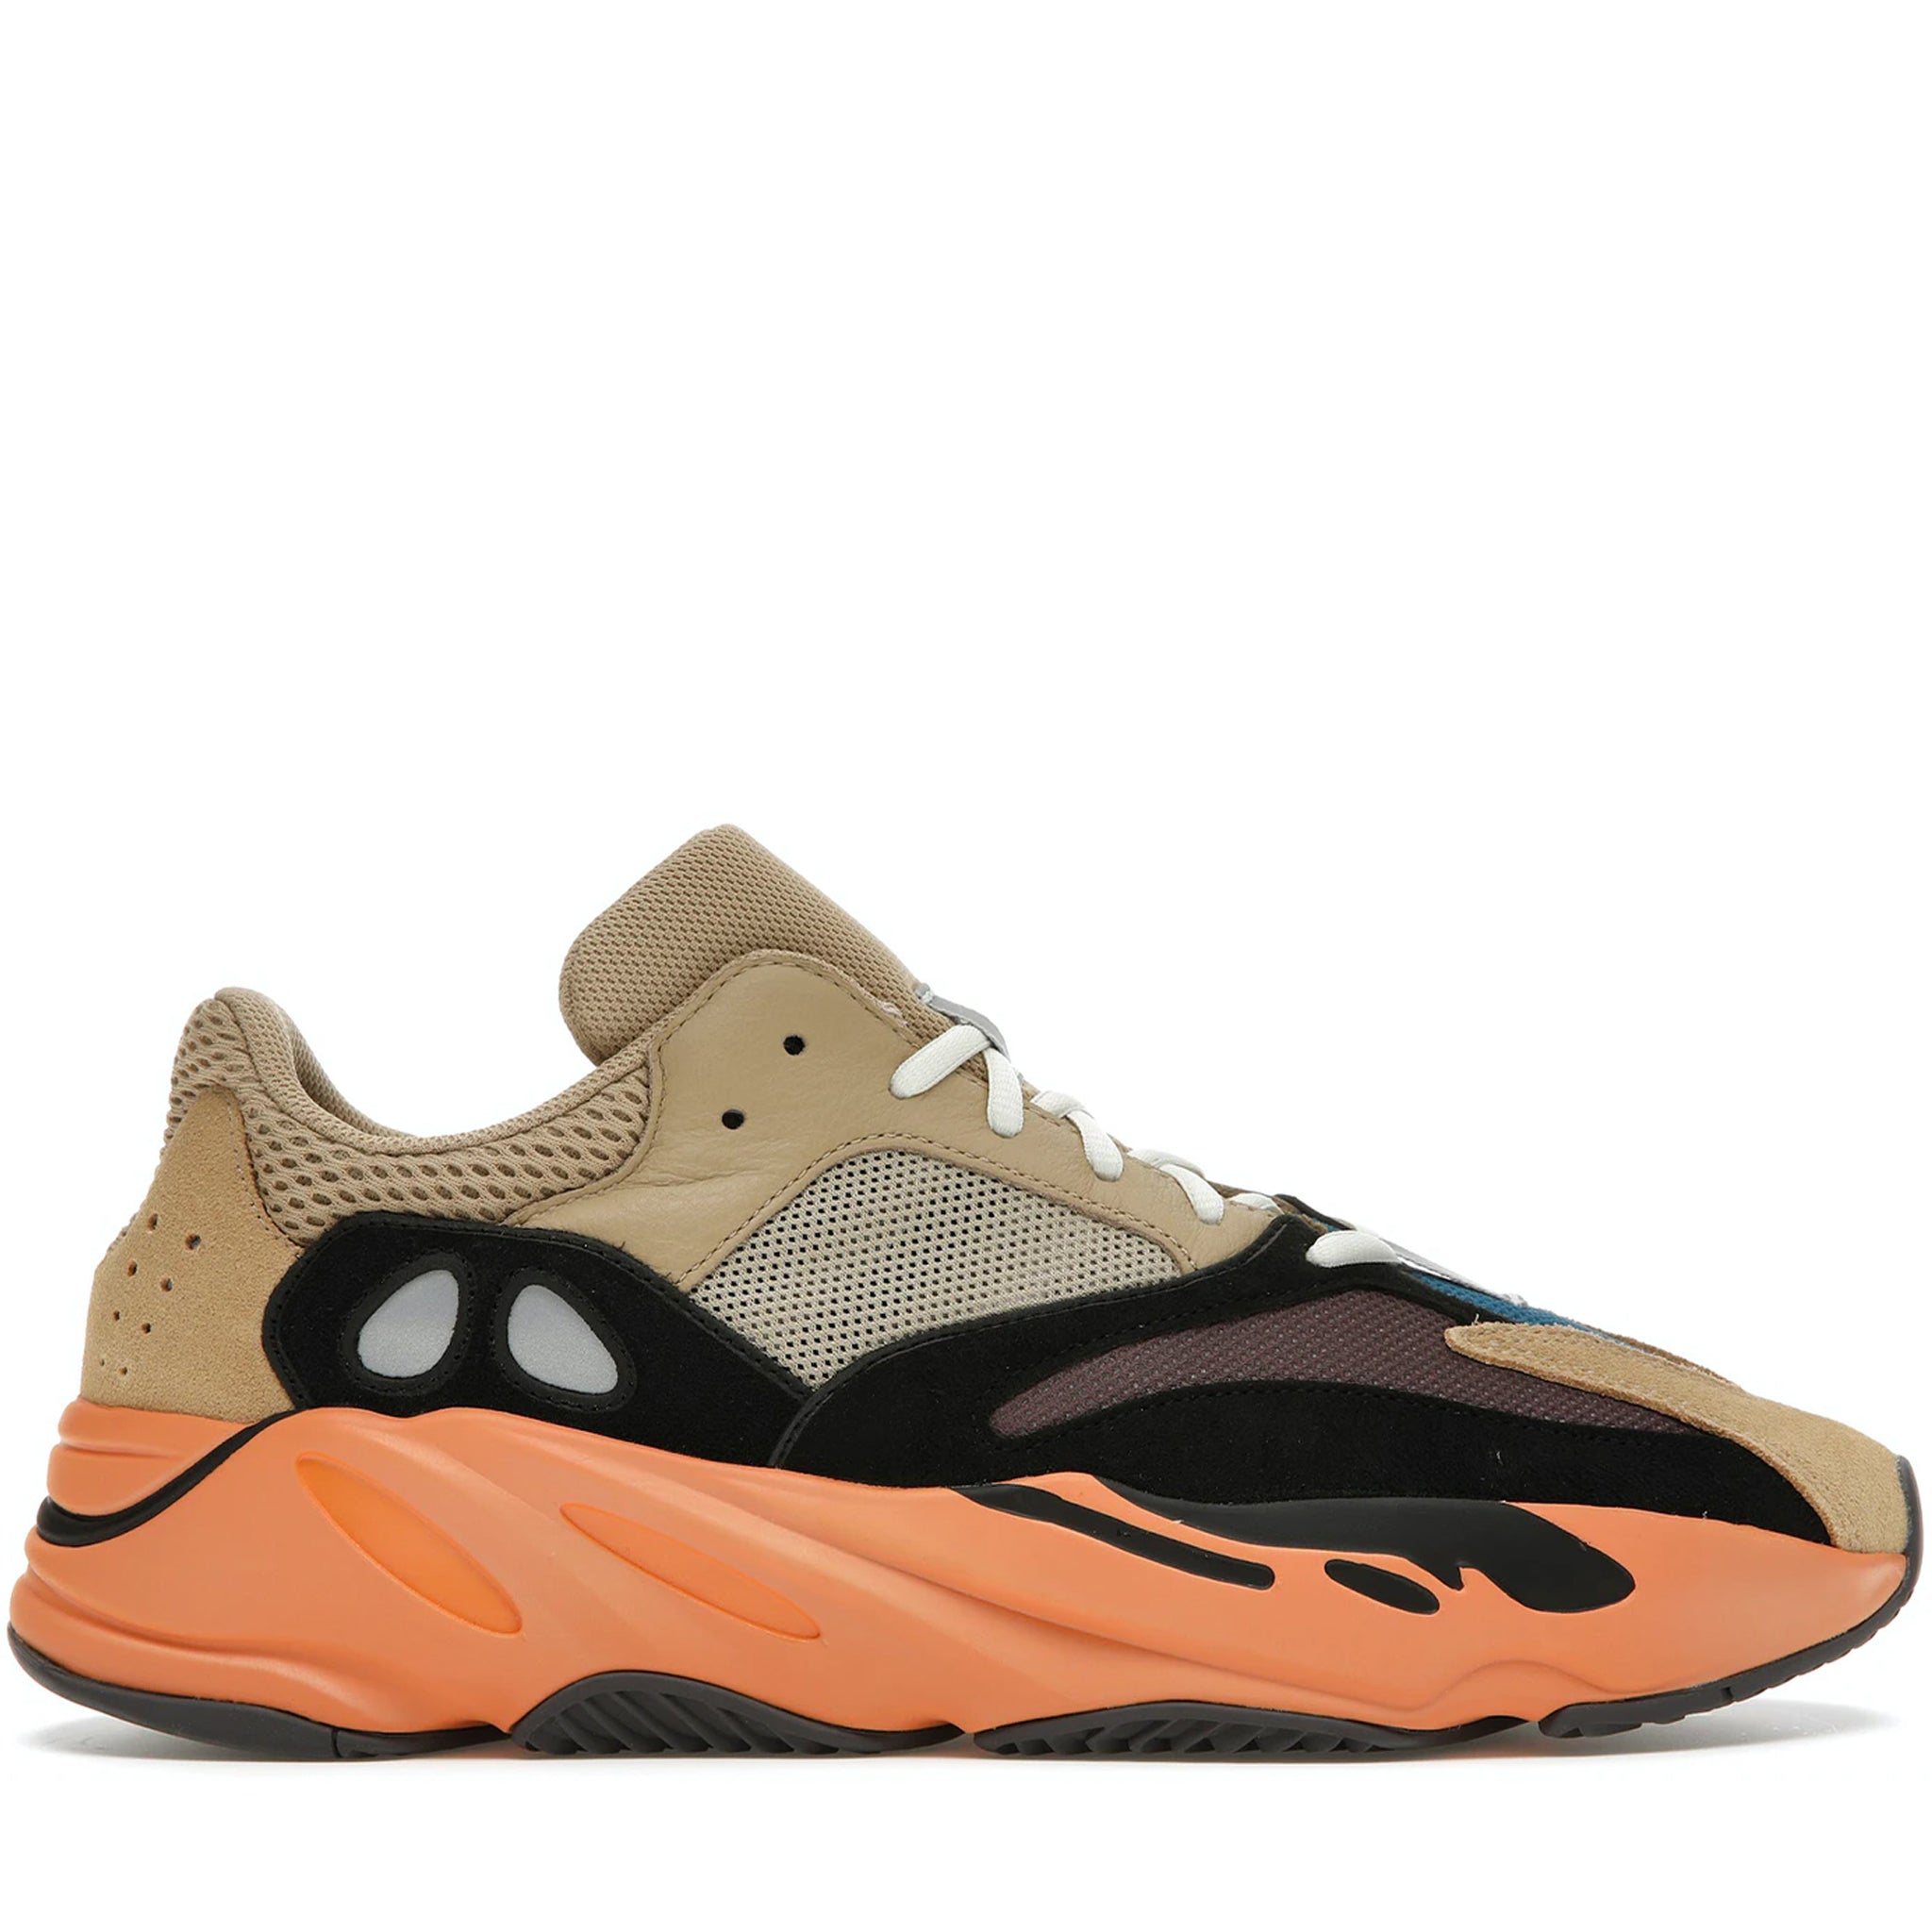 adidas Yeezy Boost 700 Enflame Amber-PLUS